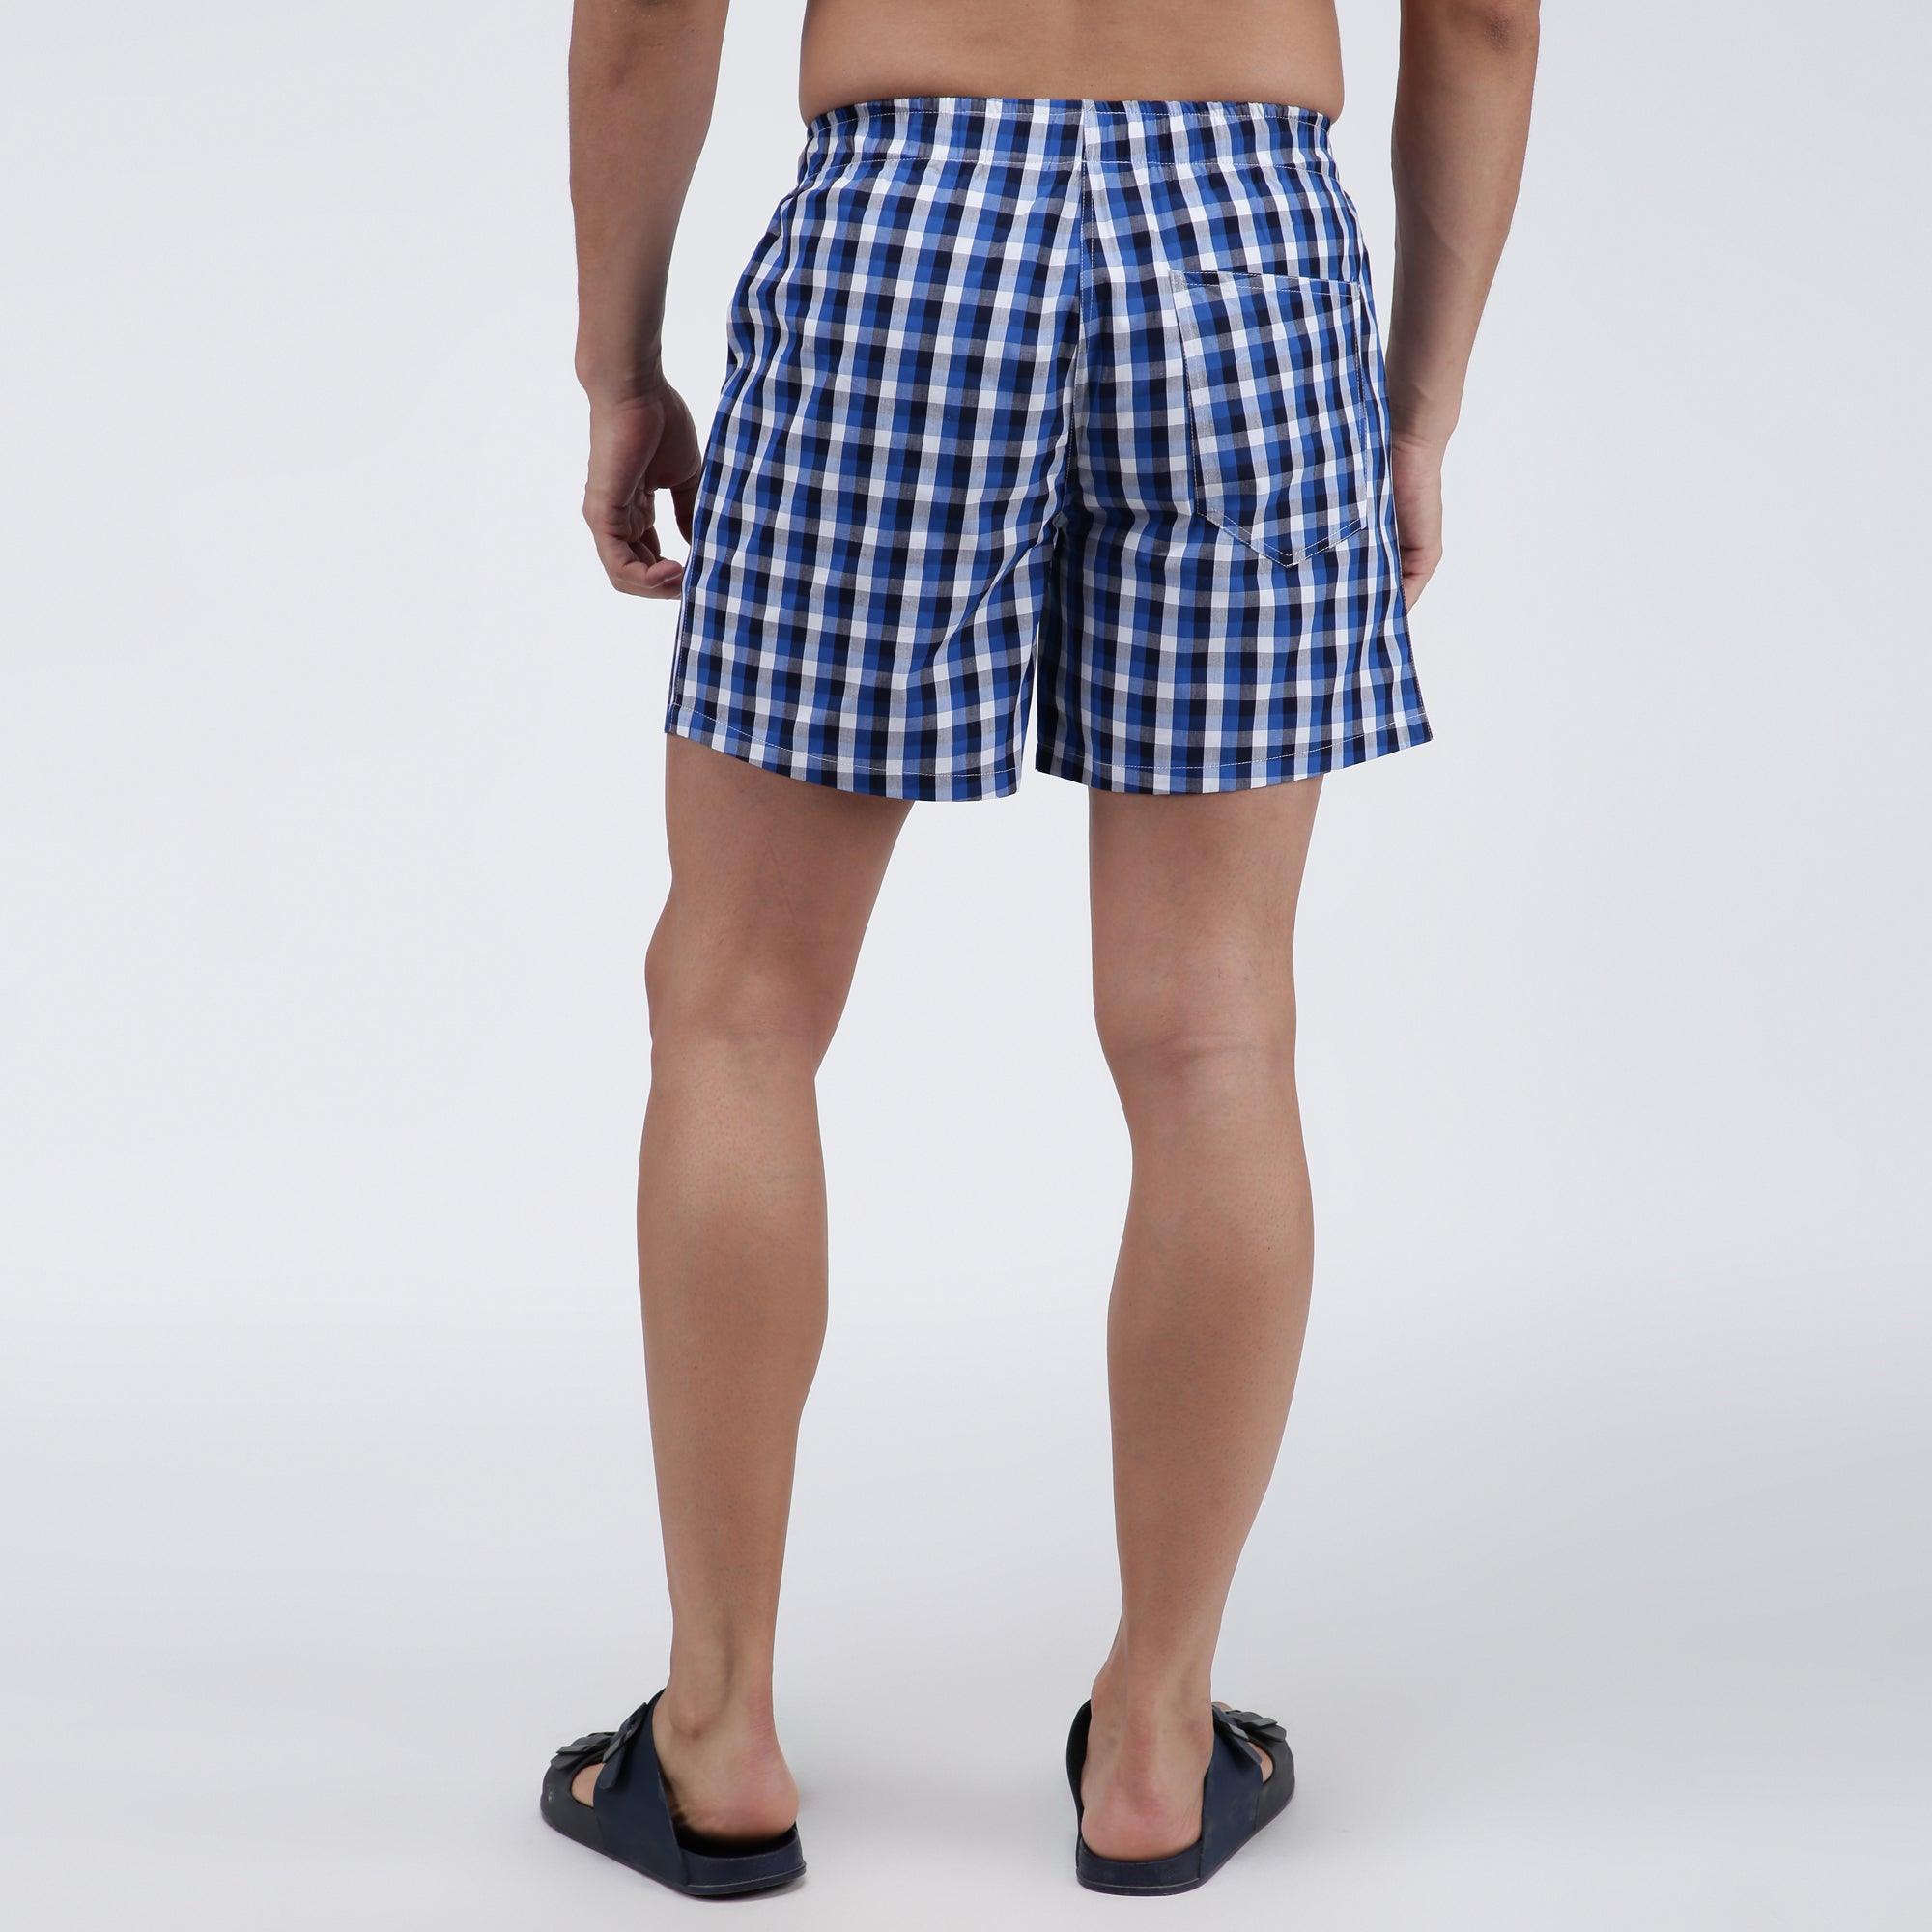 Sporto Men's Checkered Boxer Shorts (Pack Of 2) - Blue & Yellow